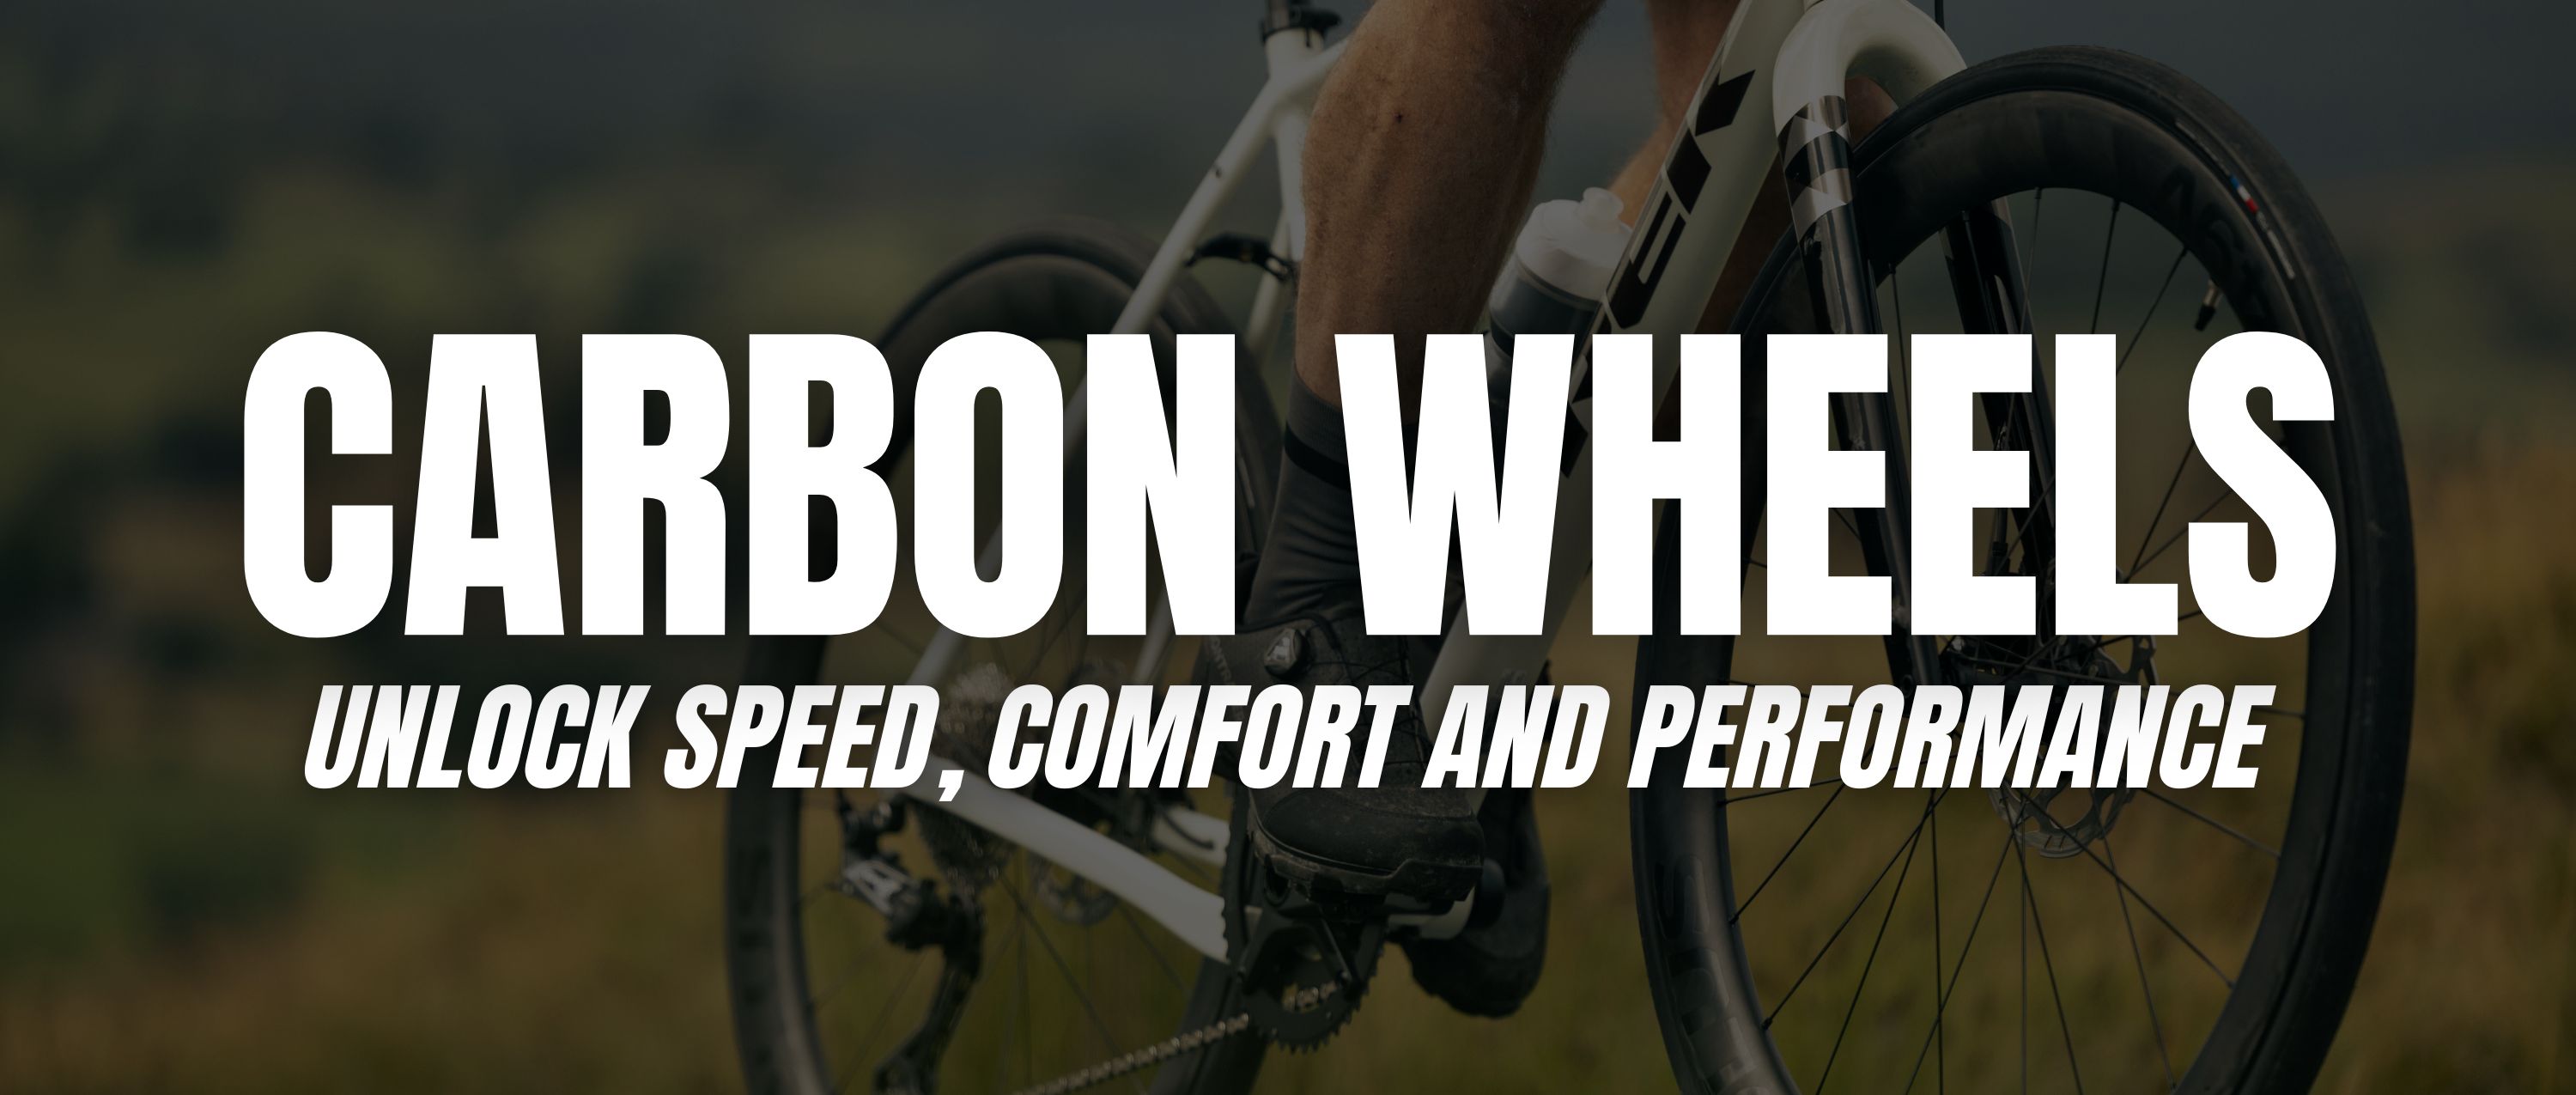 Carbon Wheels: Unlock Speed, Comfort and Performance